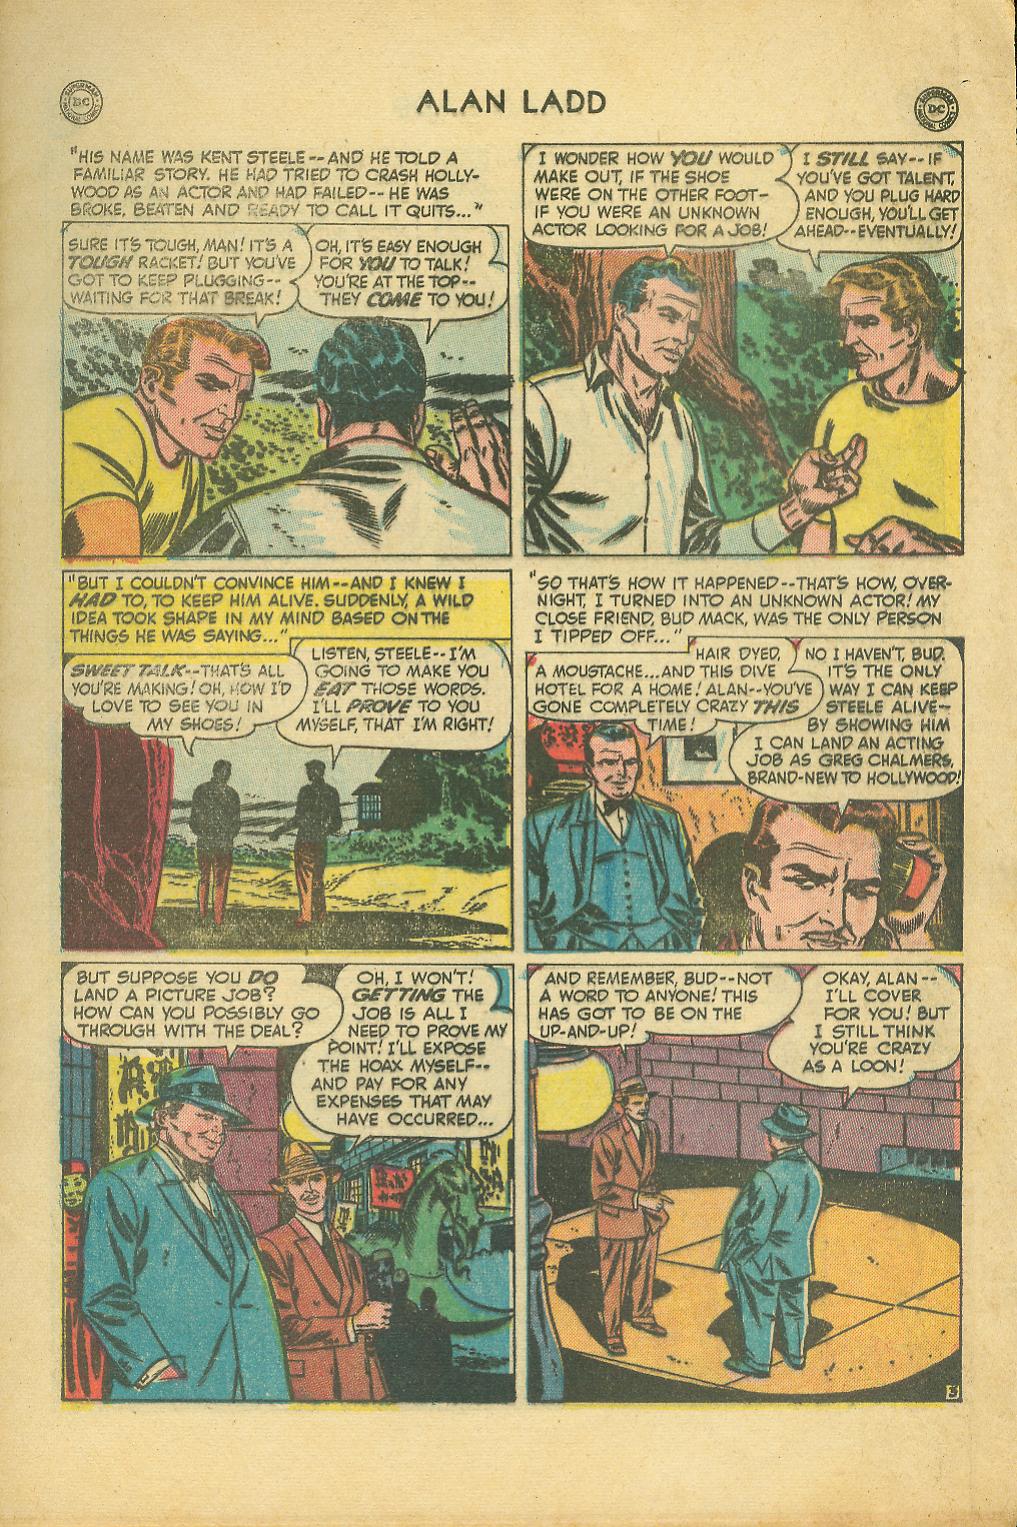 Read online Adventures of Alan Ladd comic -  Issue #7 - 5